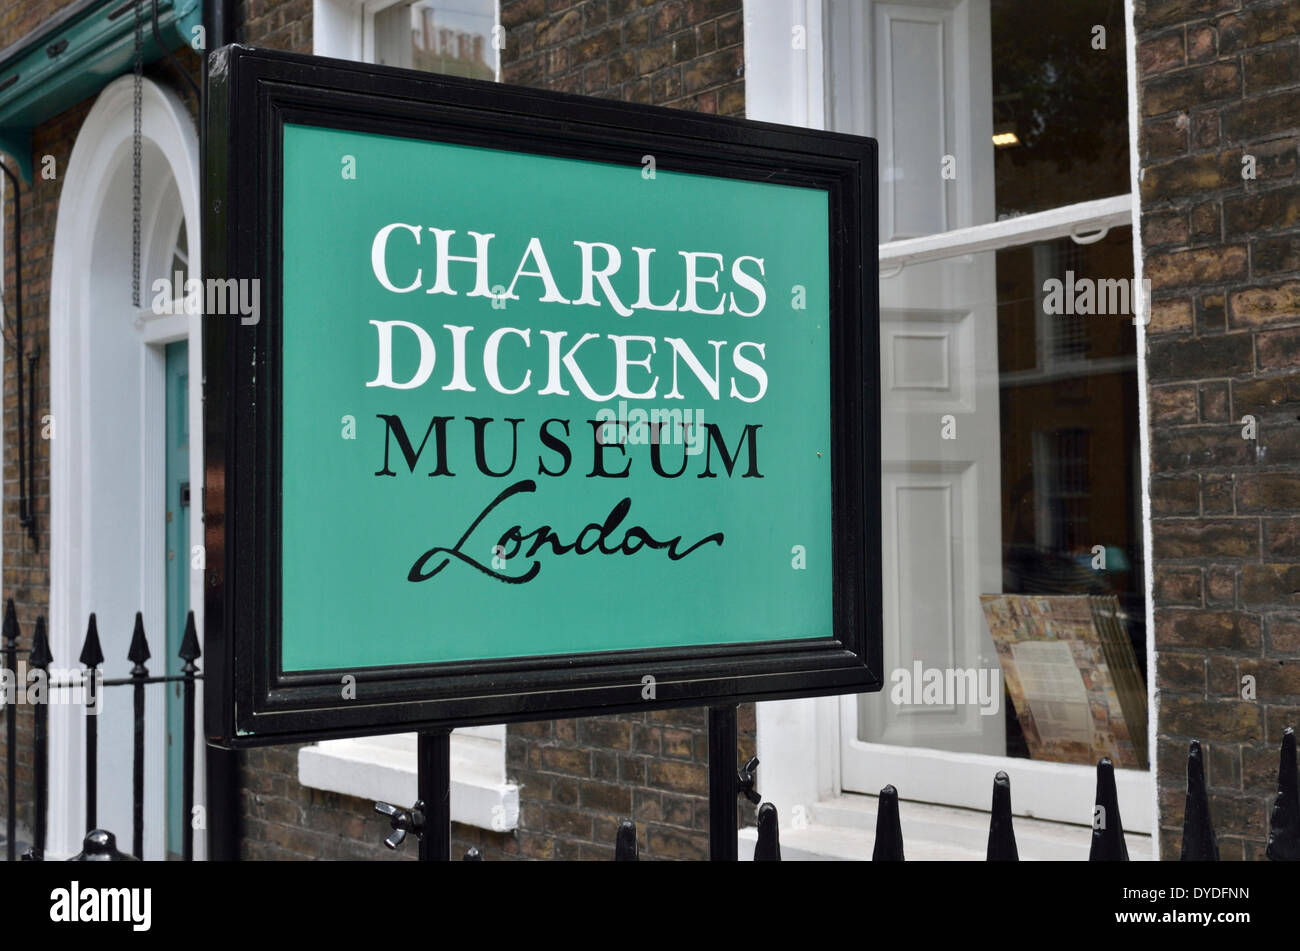 Le Charles Dickens Museum de Doughty Street. Banque D'Images